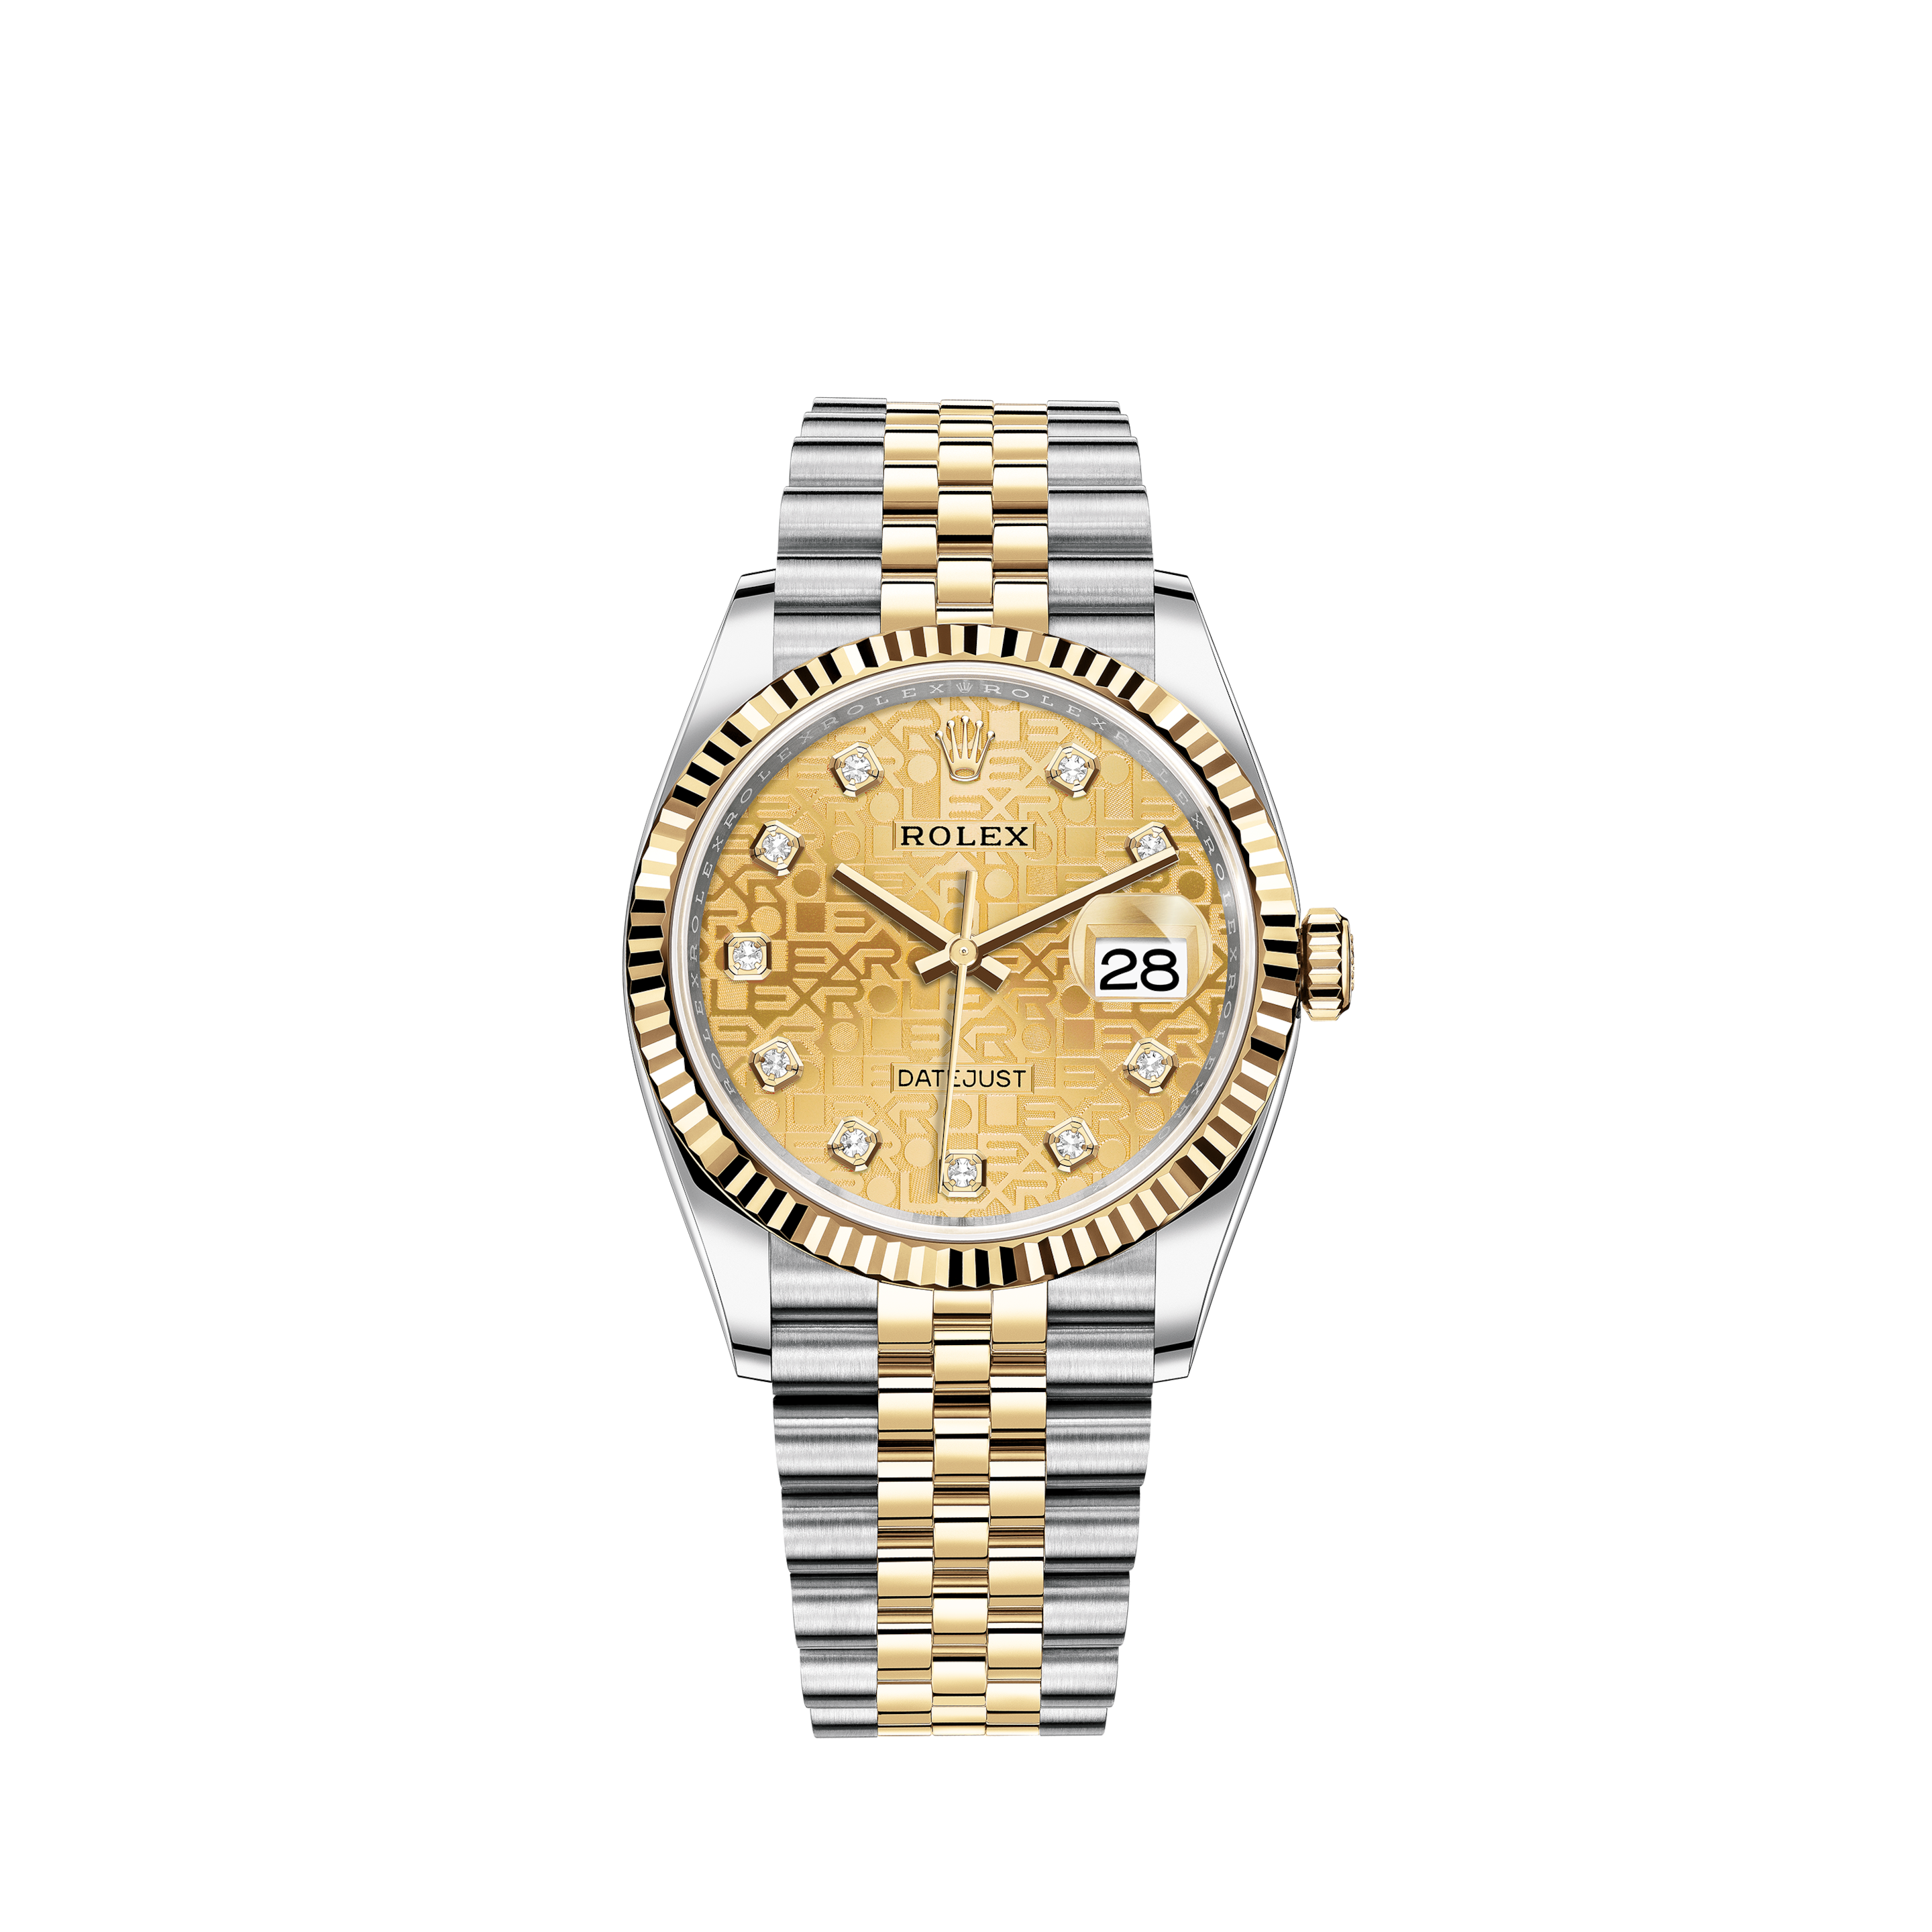 Rolex Men's Datejust Stainless Steel White Roman Dial